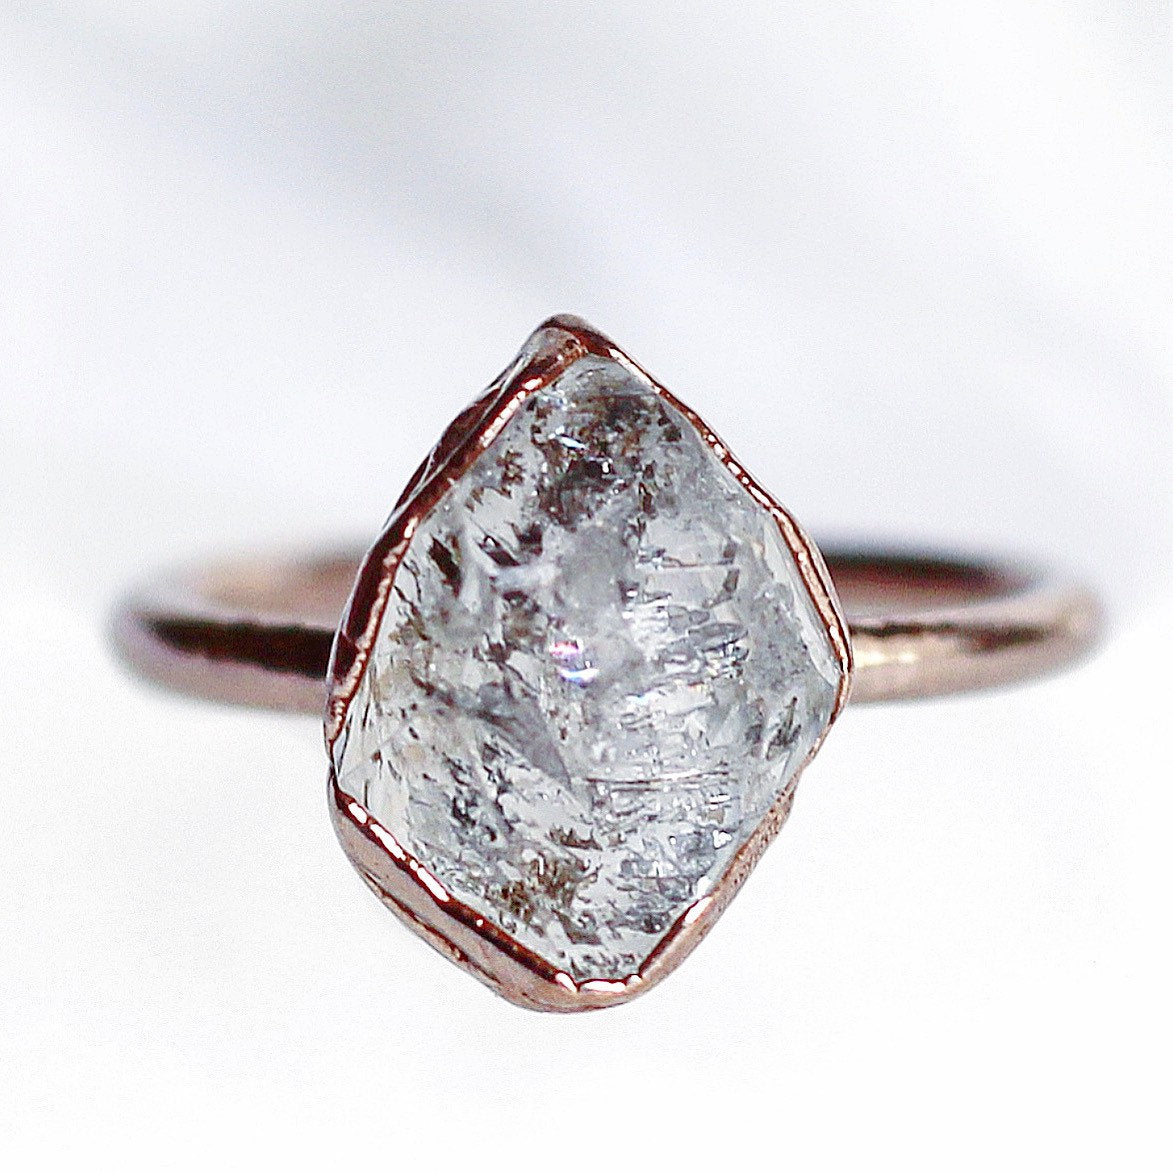 These Raw Gemstone Engagement Rings Will Take Your Breath Away